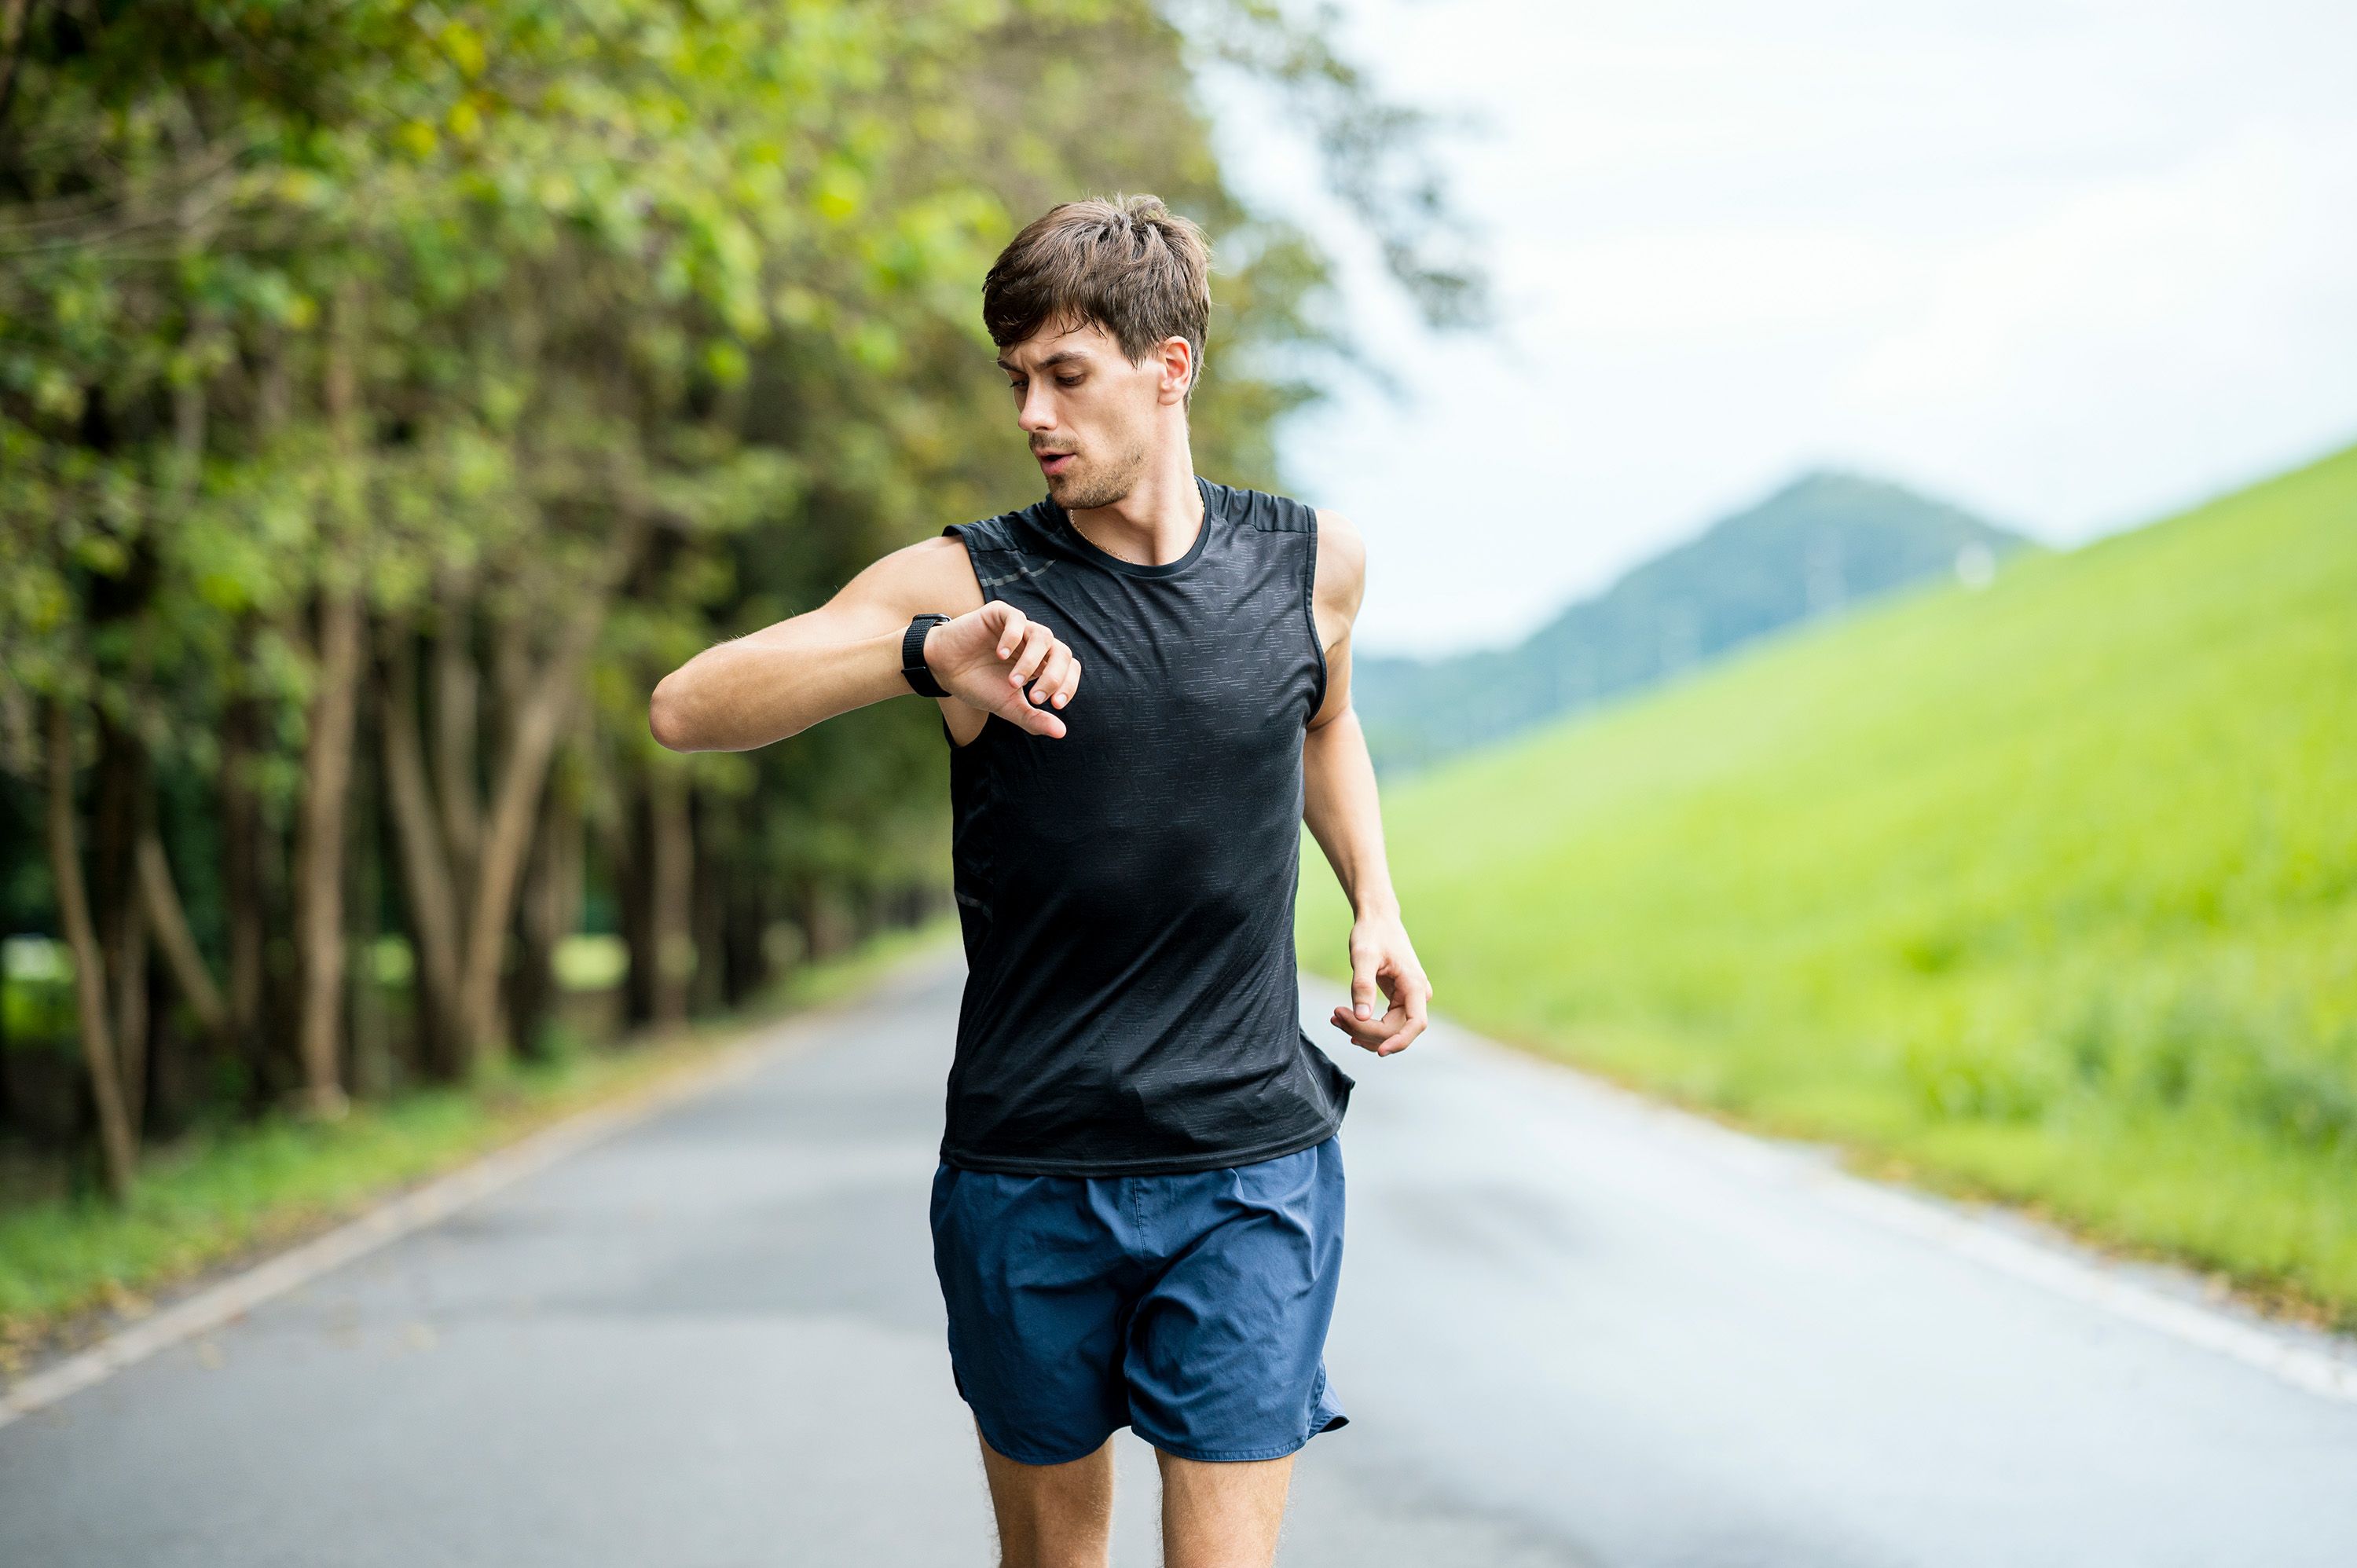 How to improve your vo2 max